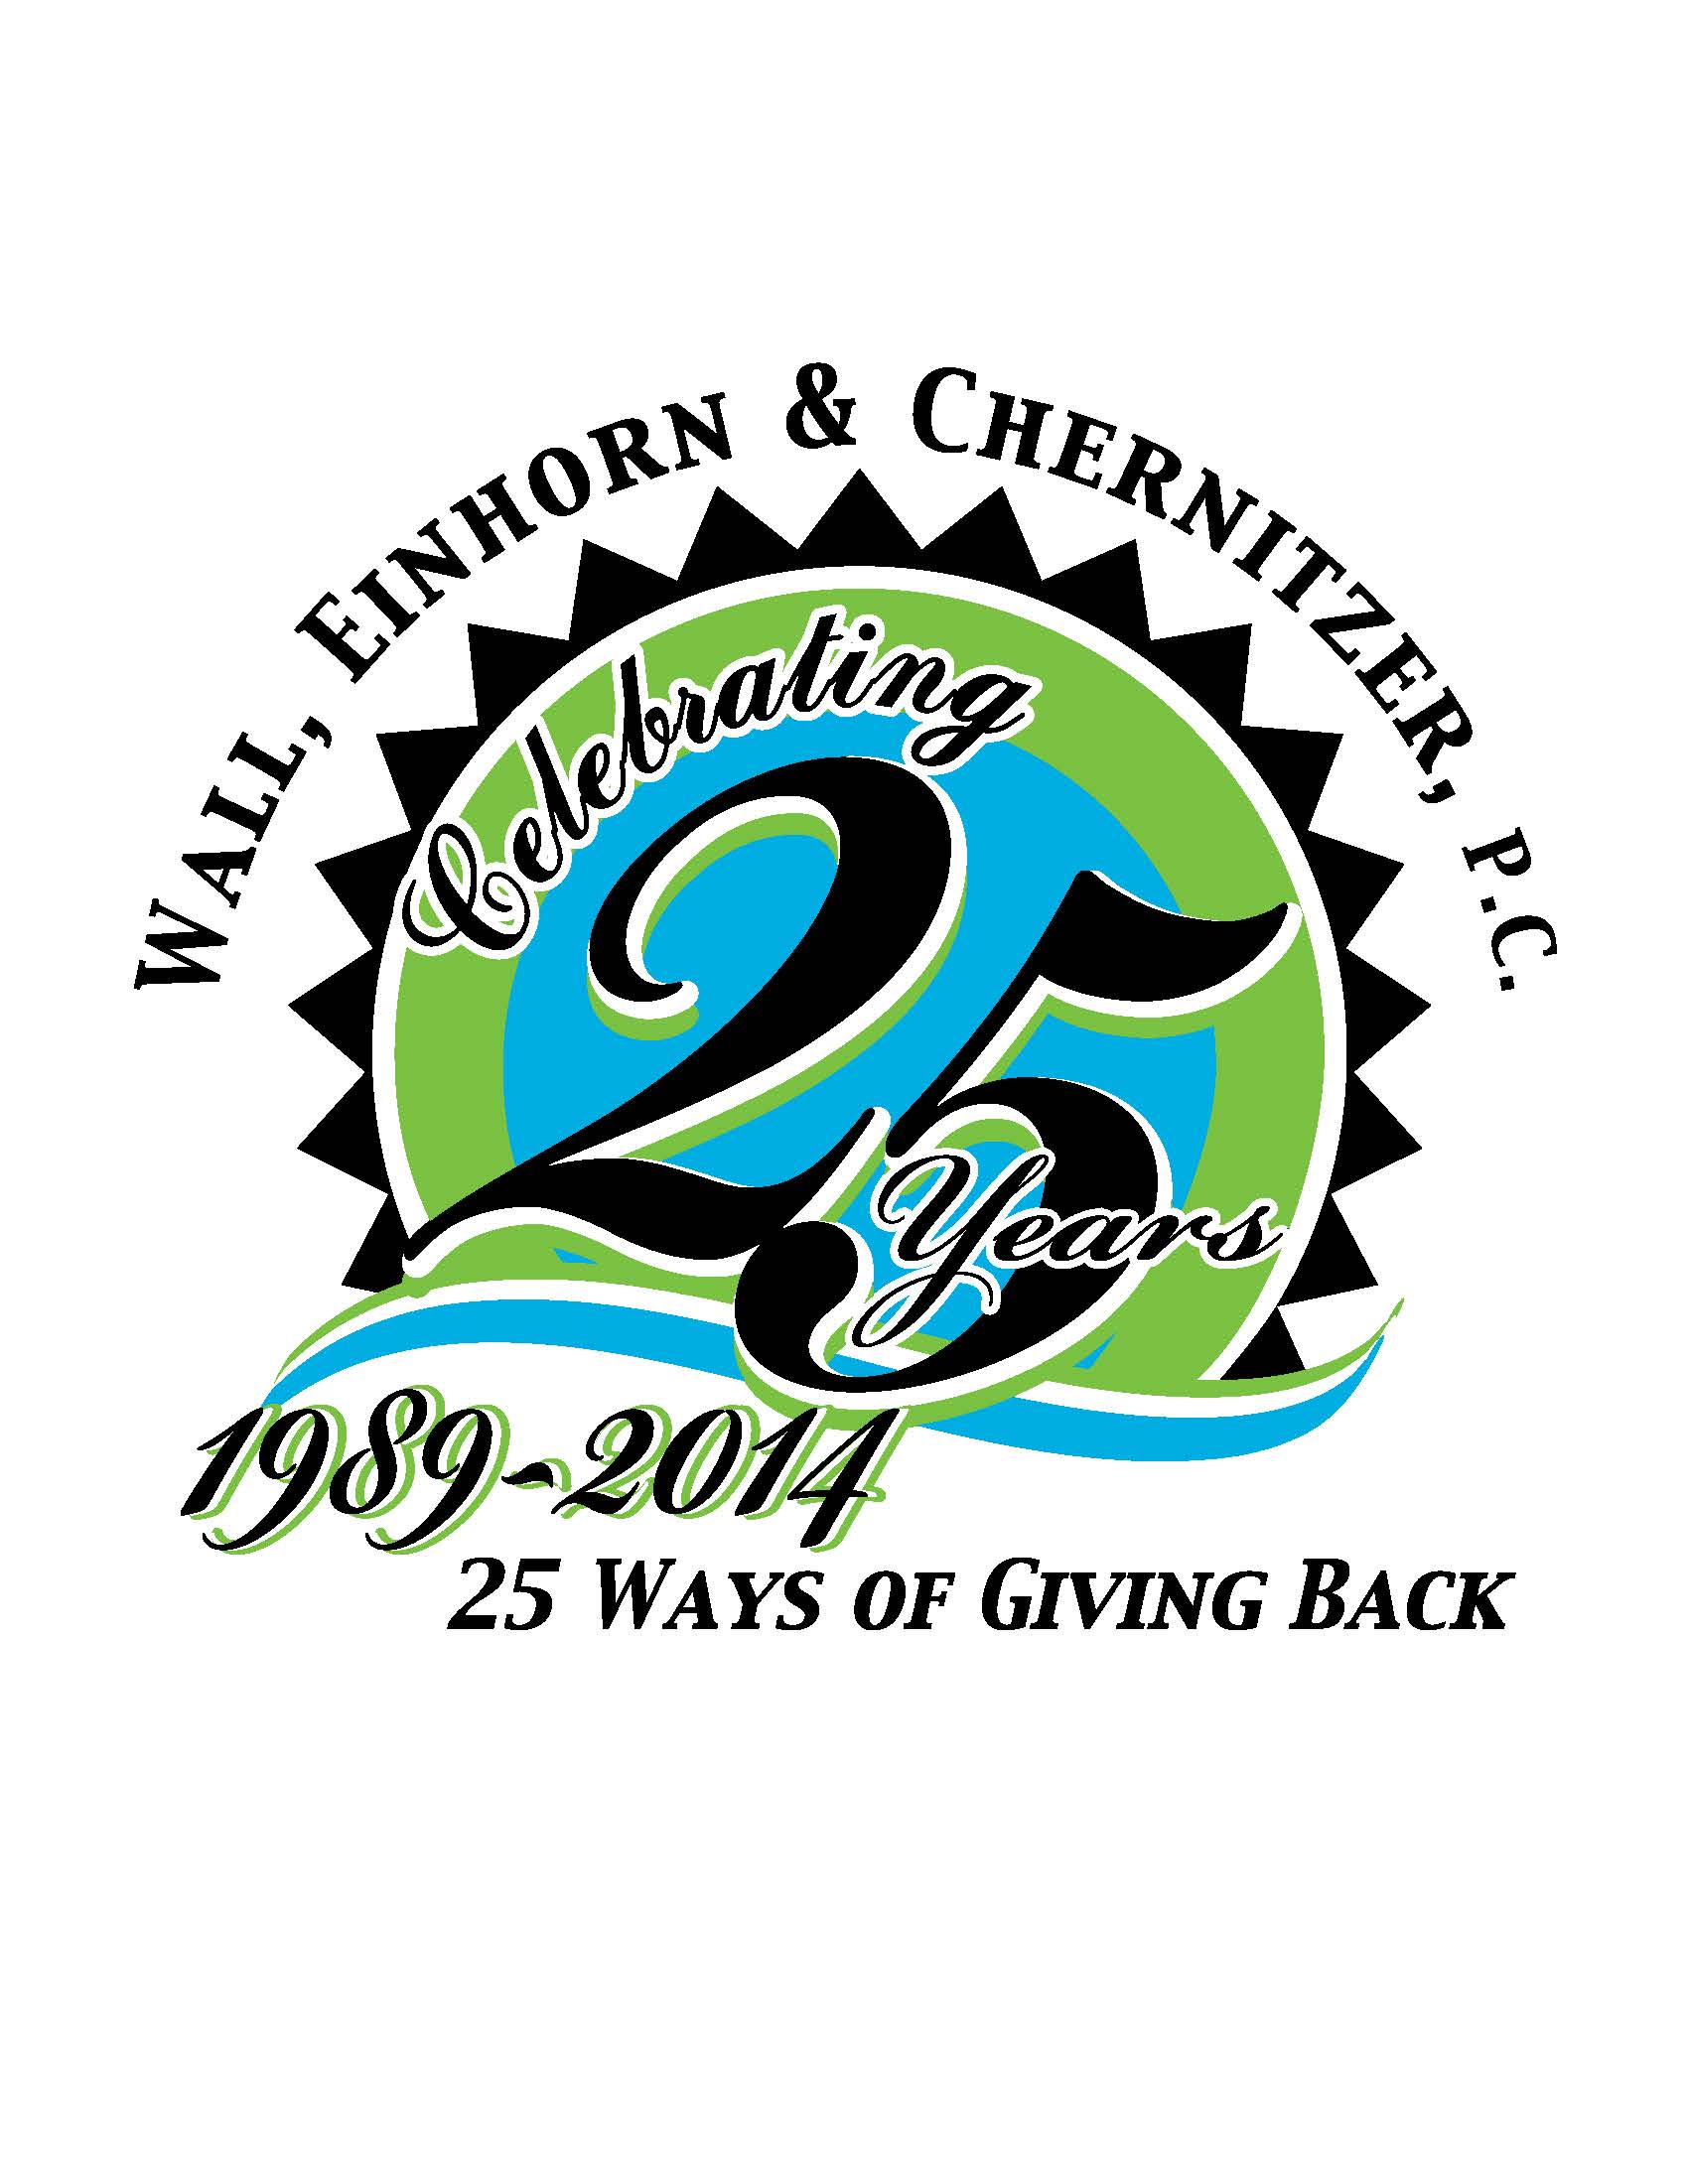 Wall Einhorn & Chernitzer P.C. "25 Ways of Giving Back" Anniversary Campaign to Benefit Local Charities